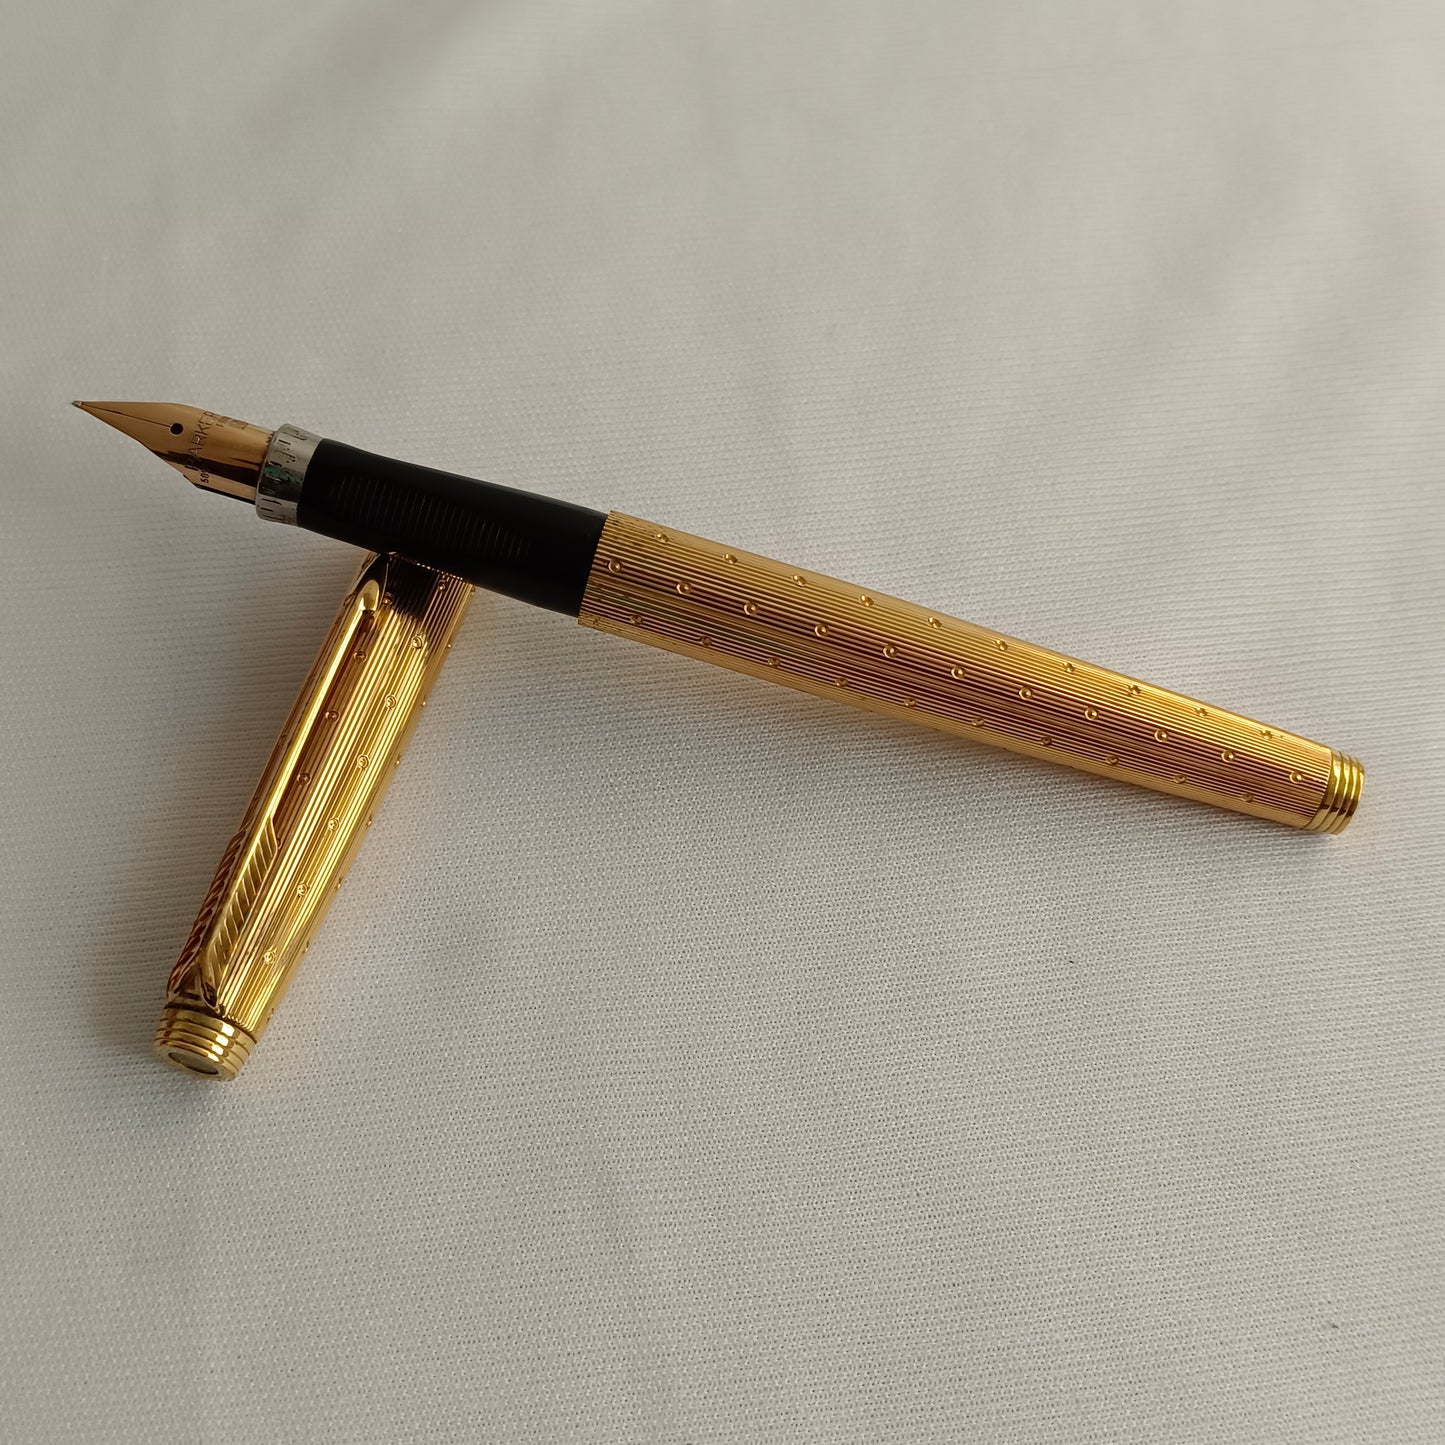 Parker 75 Gold Plated Perle 14kt Gold Nib Fountain Pen